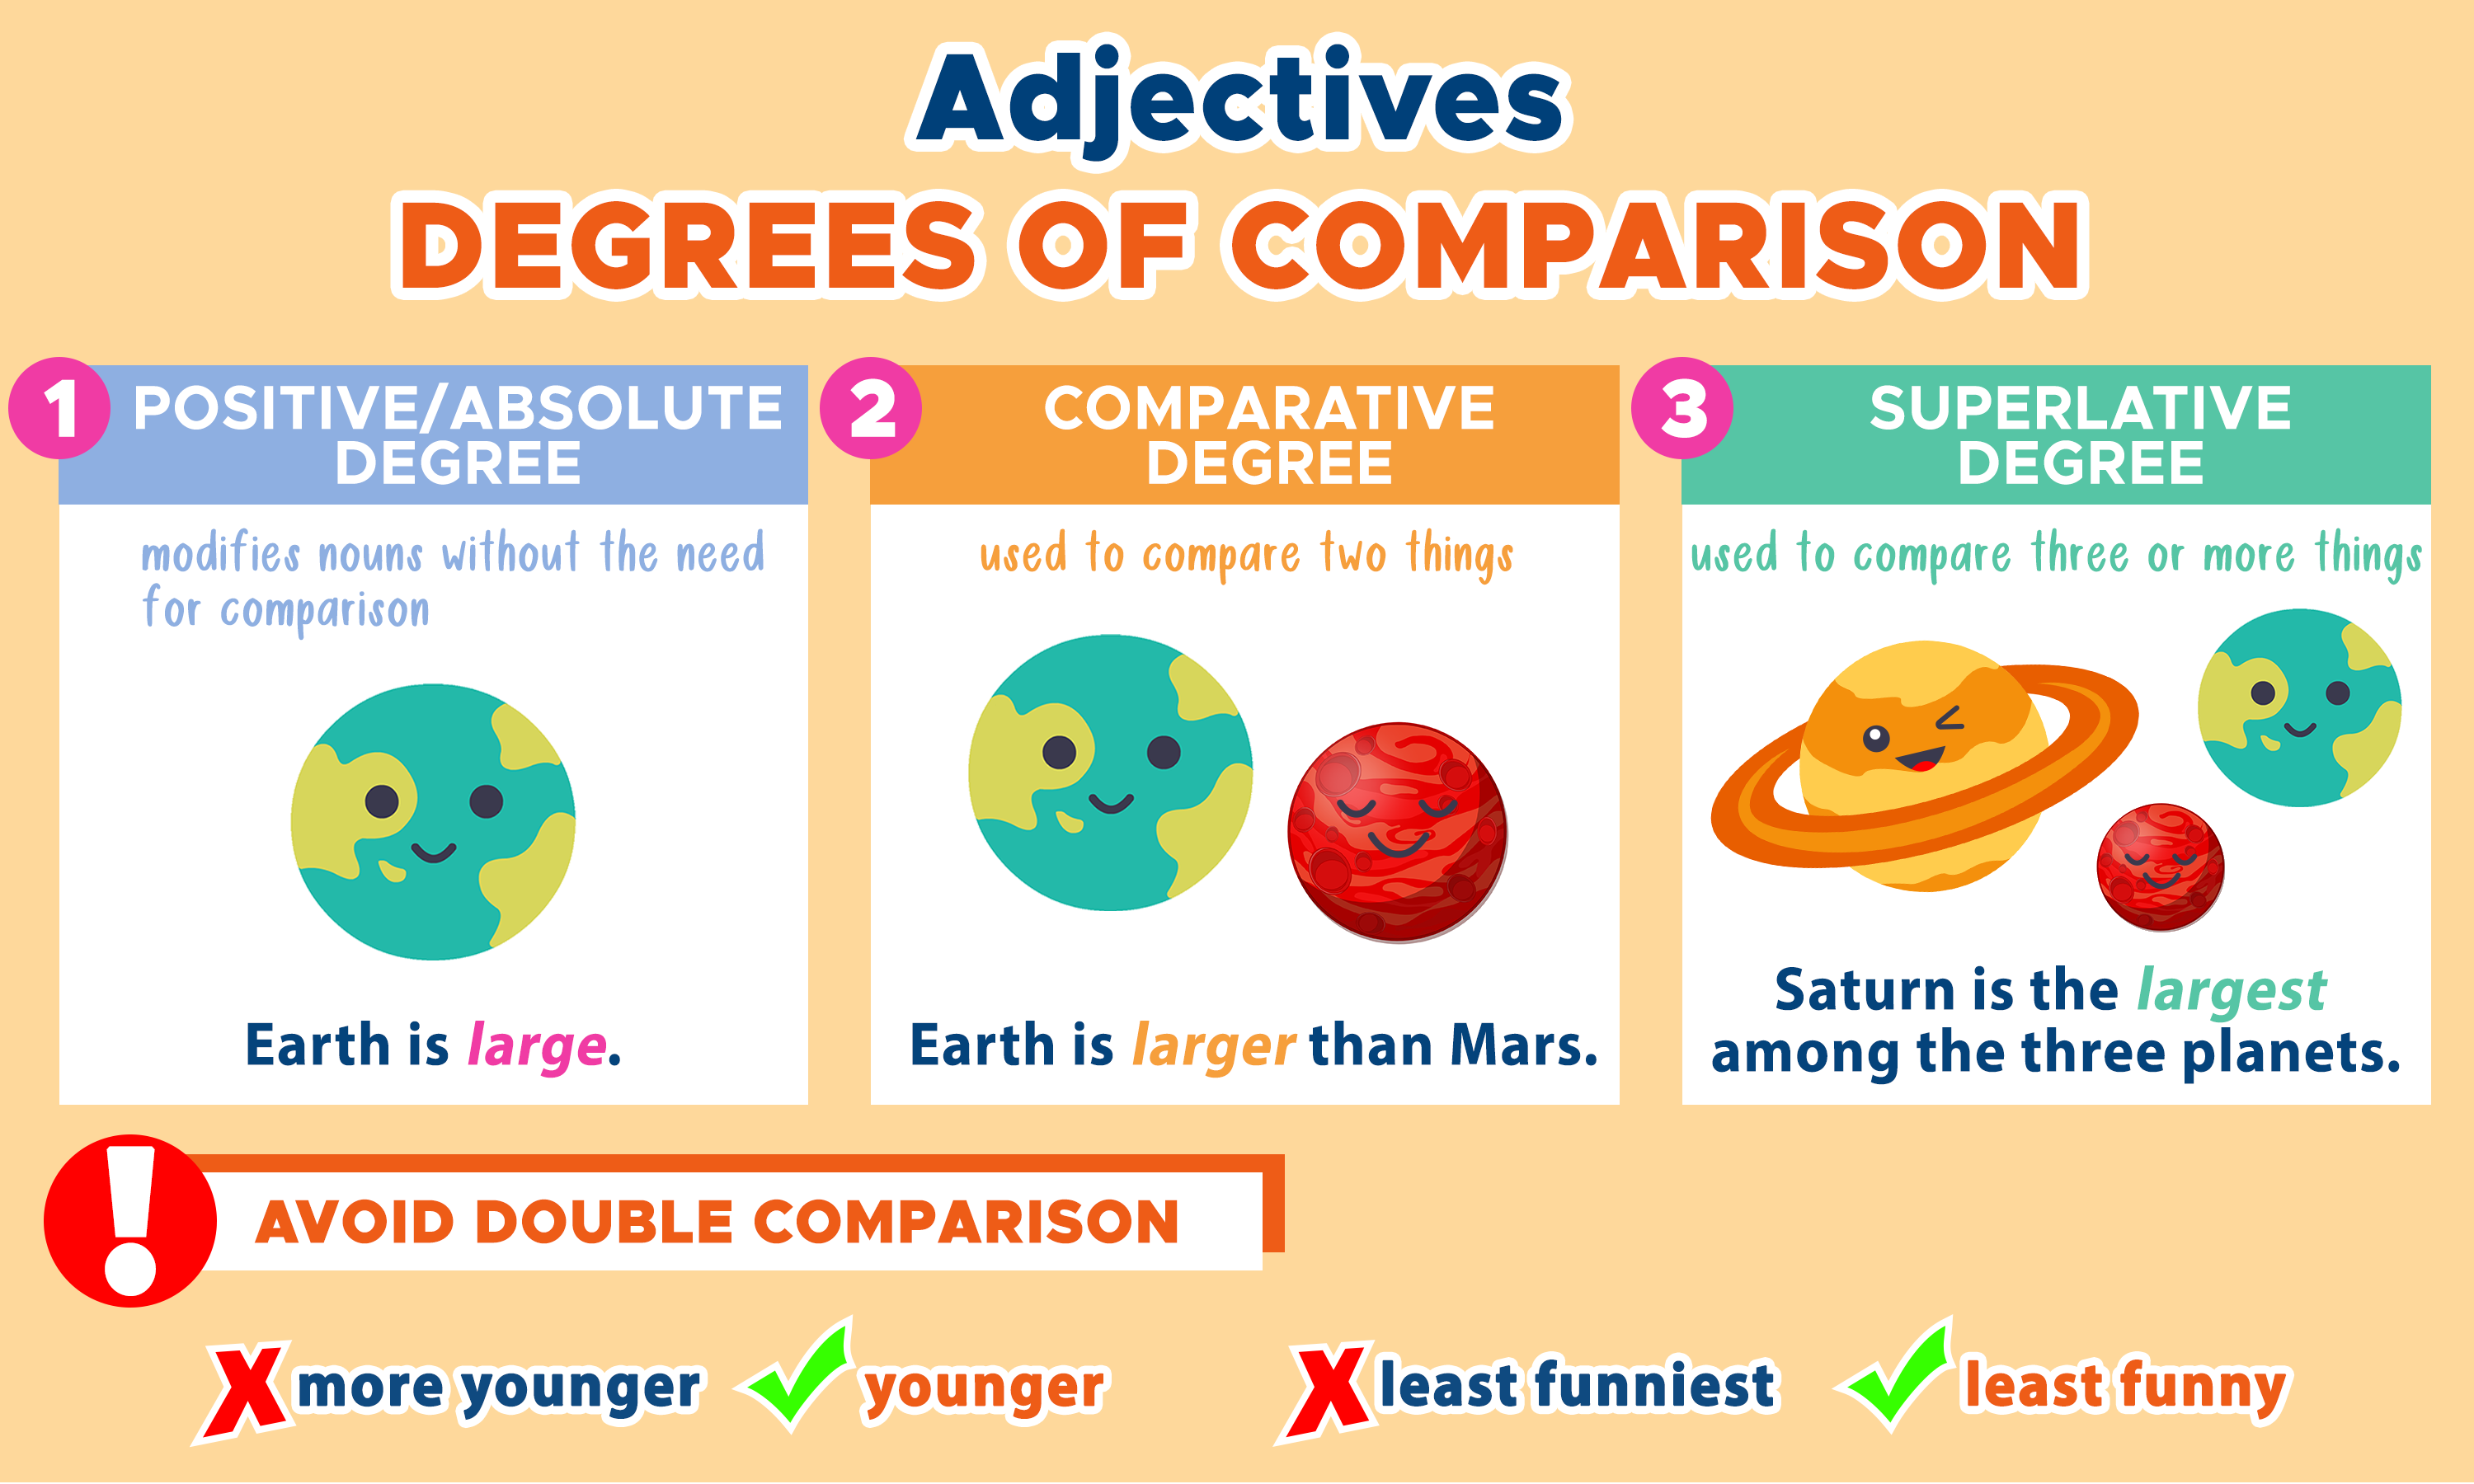 The degrees of comparison.